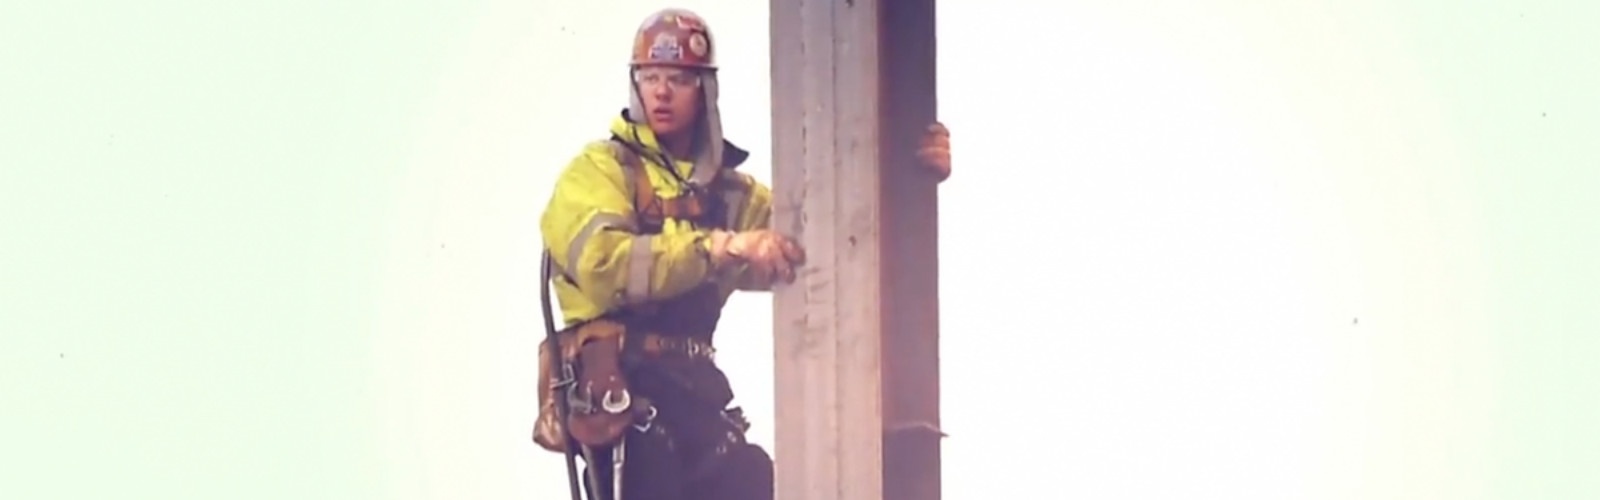 employee working at heights and safety training.jpg